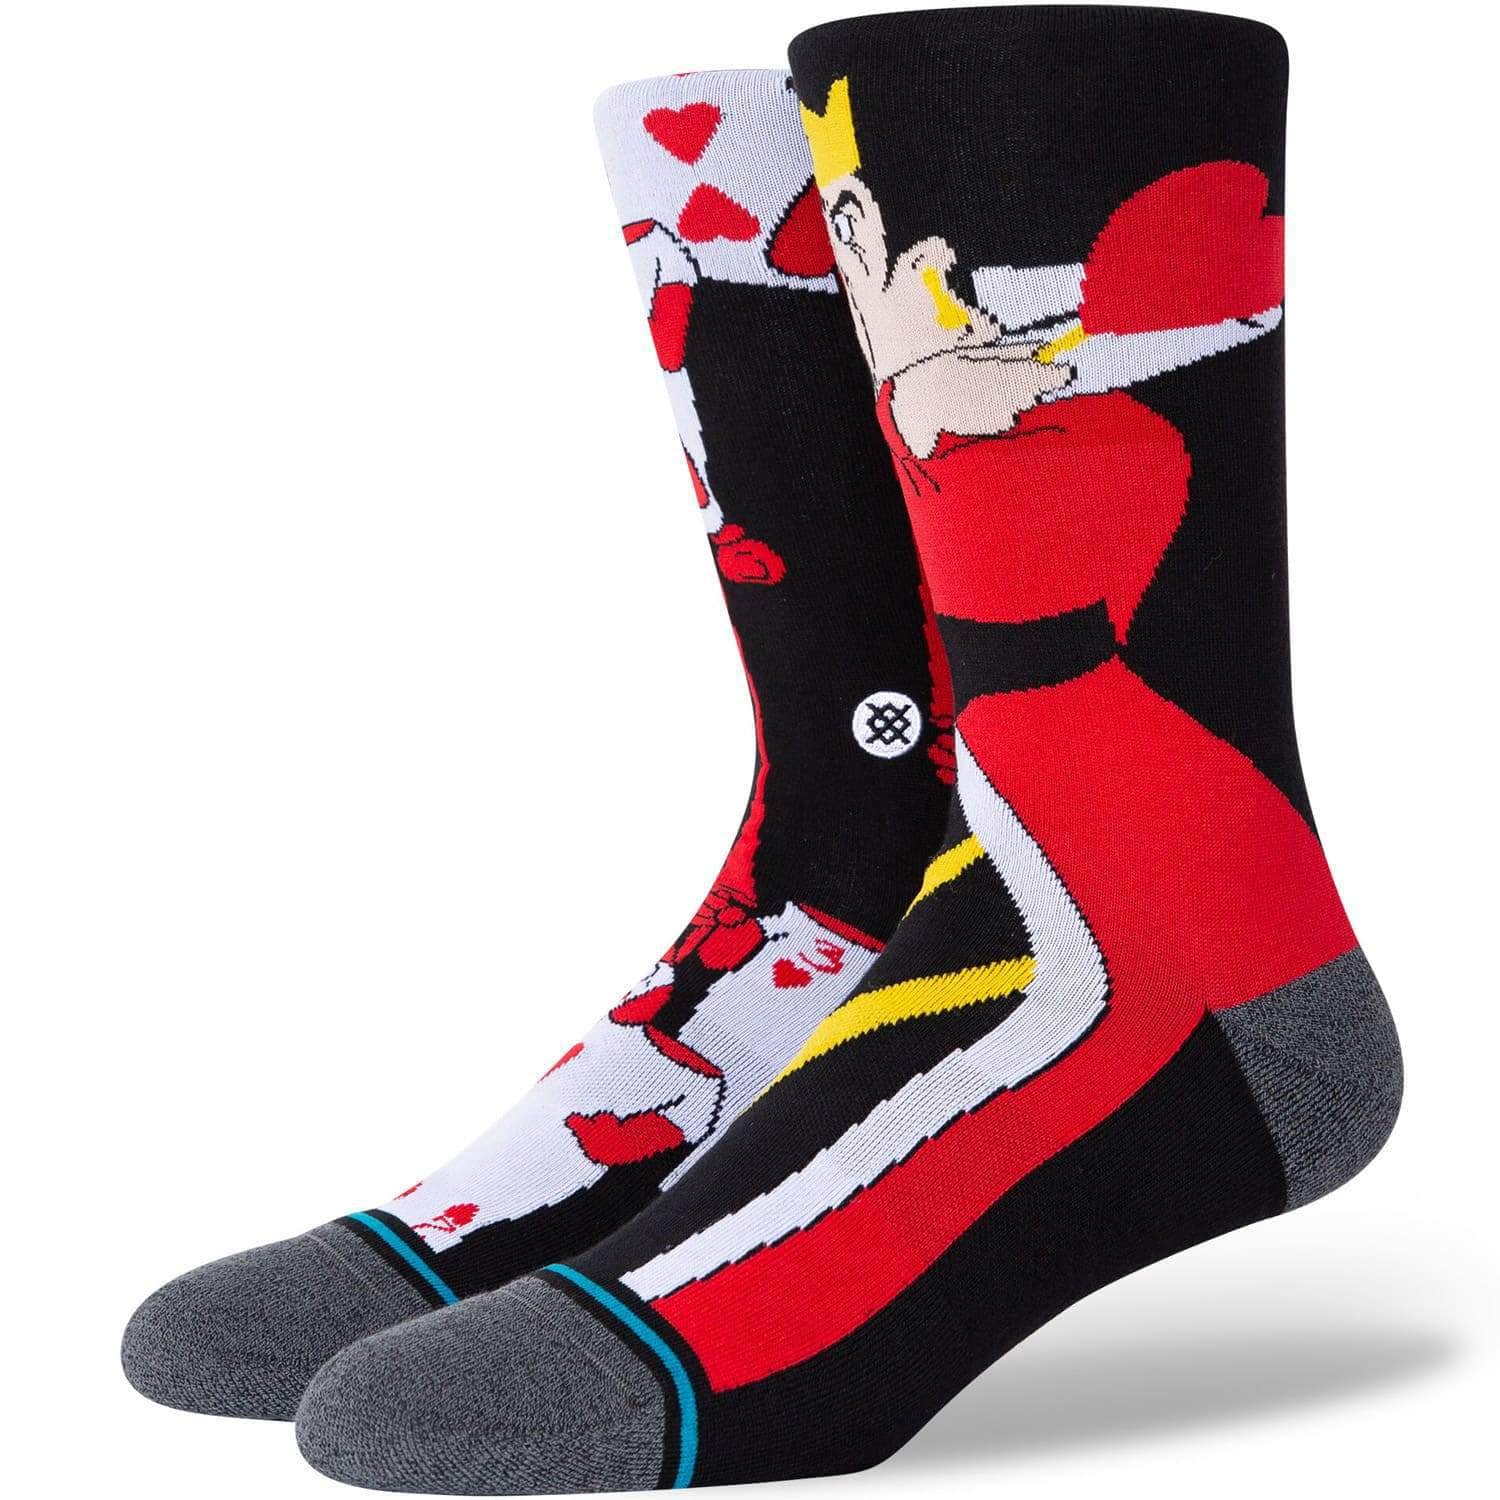 Stance X Disney Off With Their Heads Socks - Black - Unisex Crew Length Socks by Stance